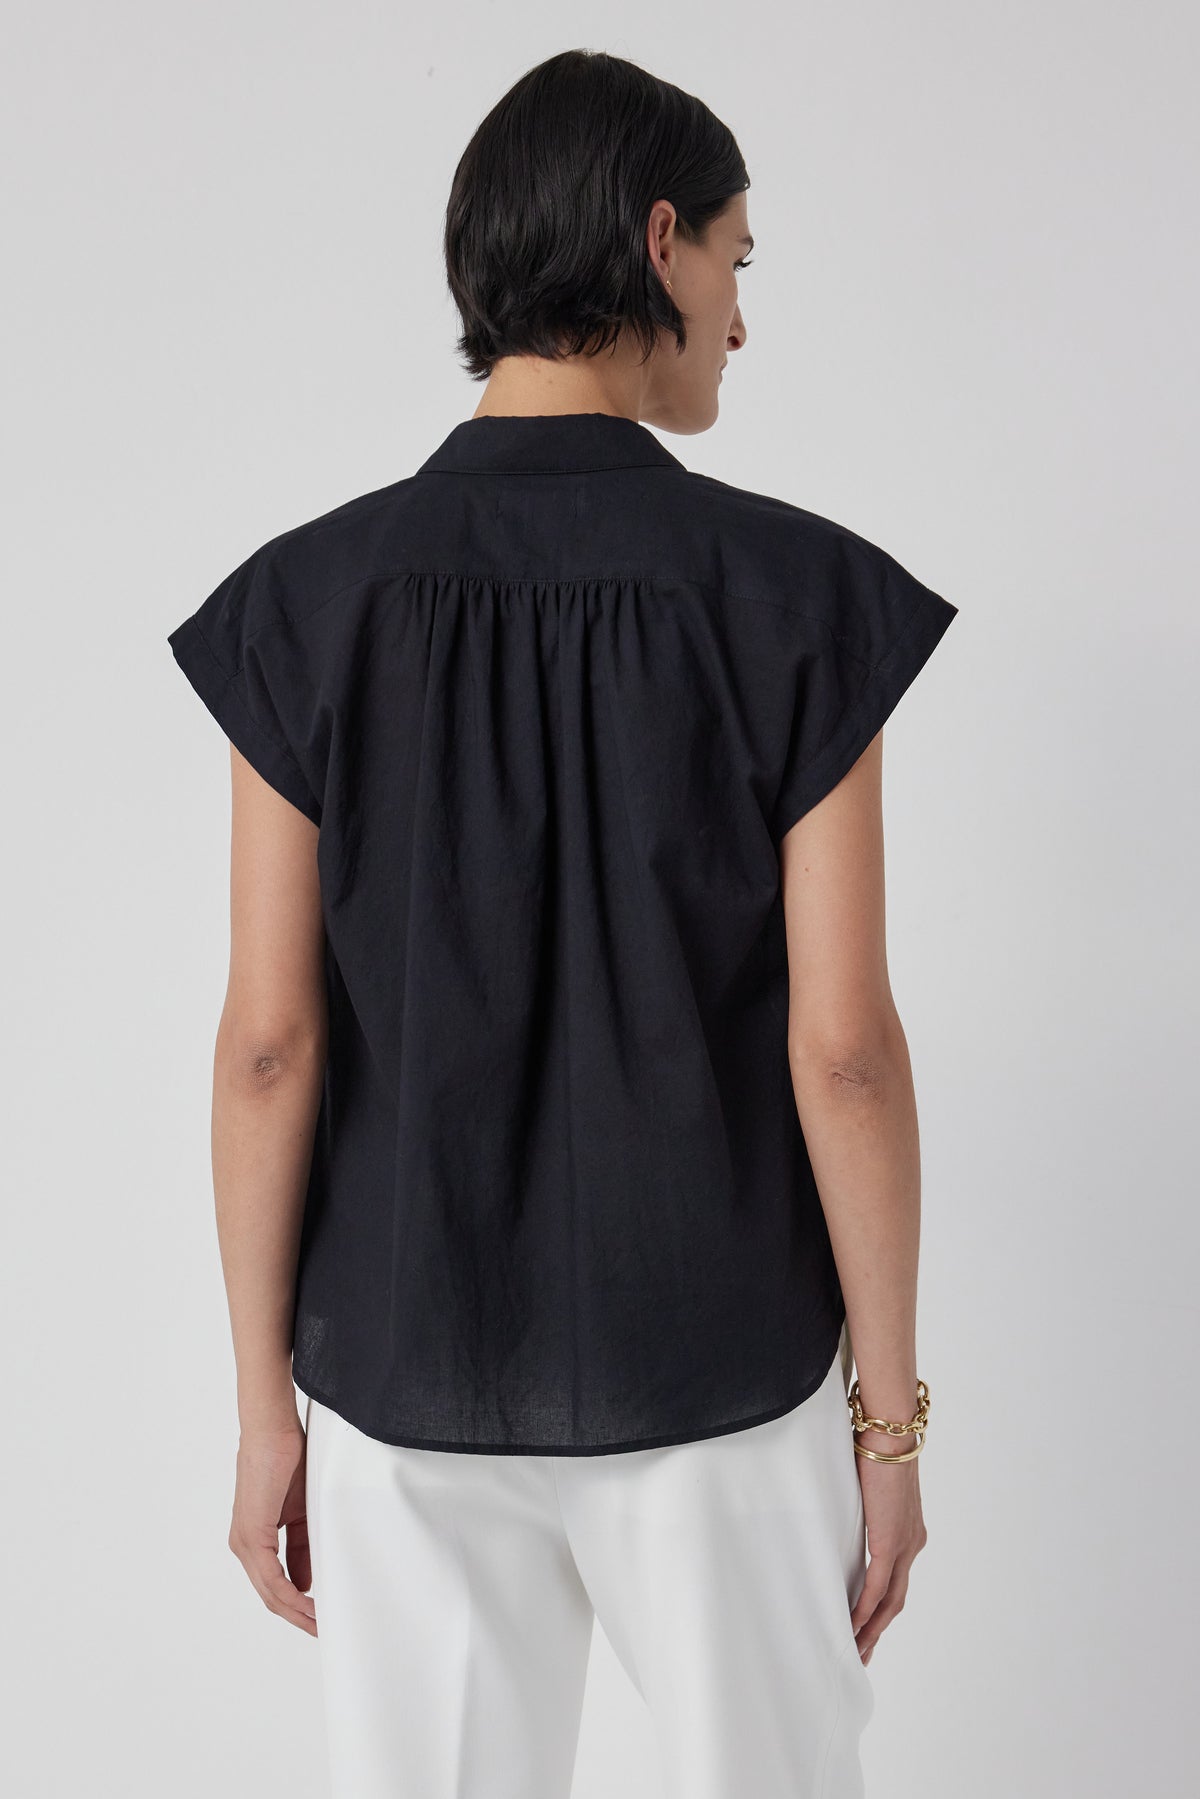   The back view of a woman wearing a black PALISADES SHIRT by Velvet by Jenny Graham and white pants. 